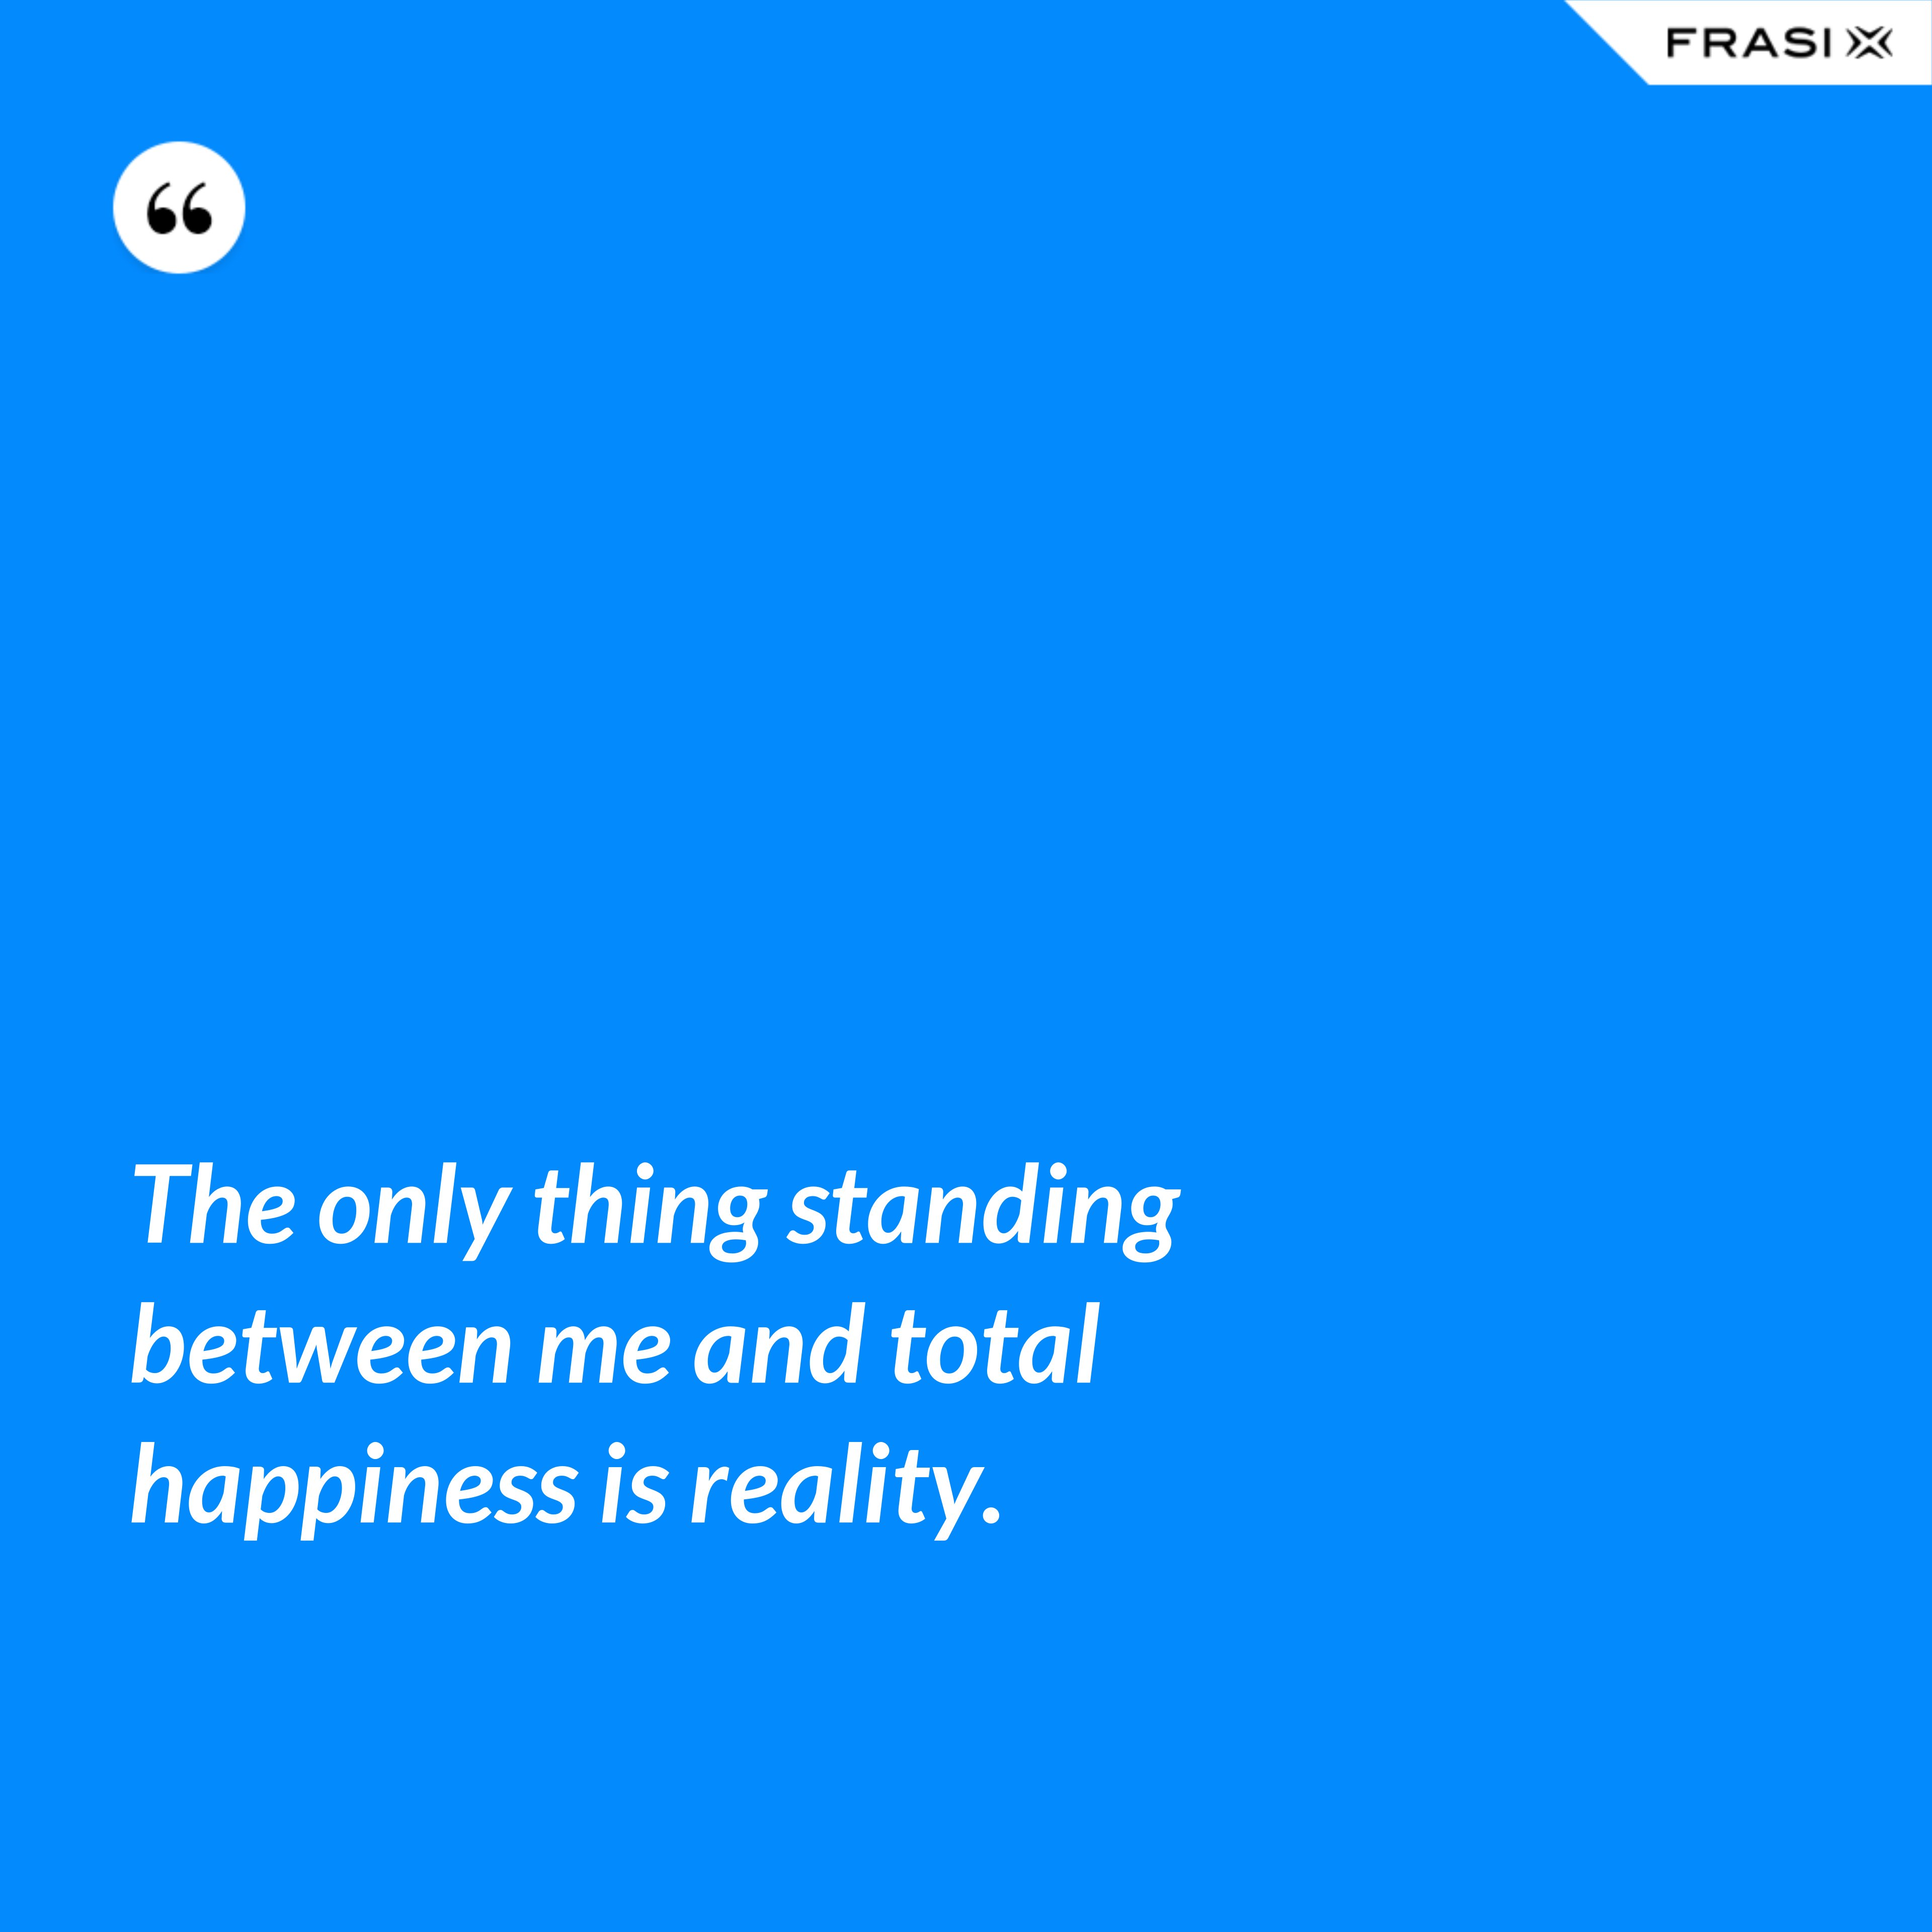 The only thing standing between me and total happiness is reality. - Anonimo